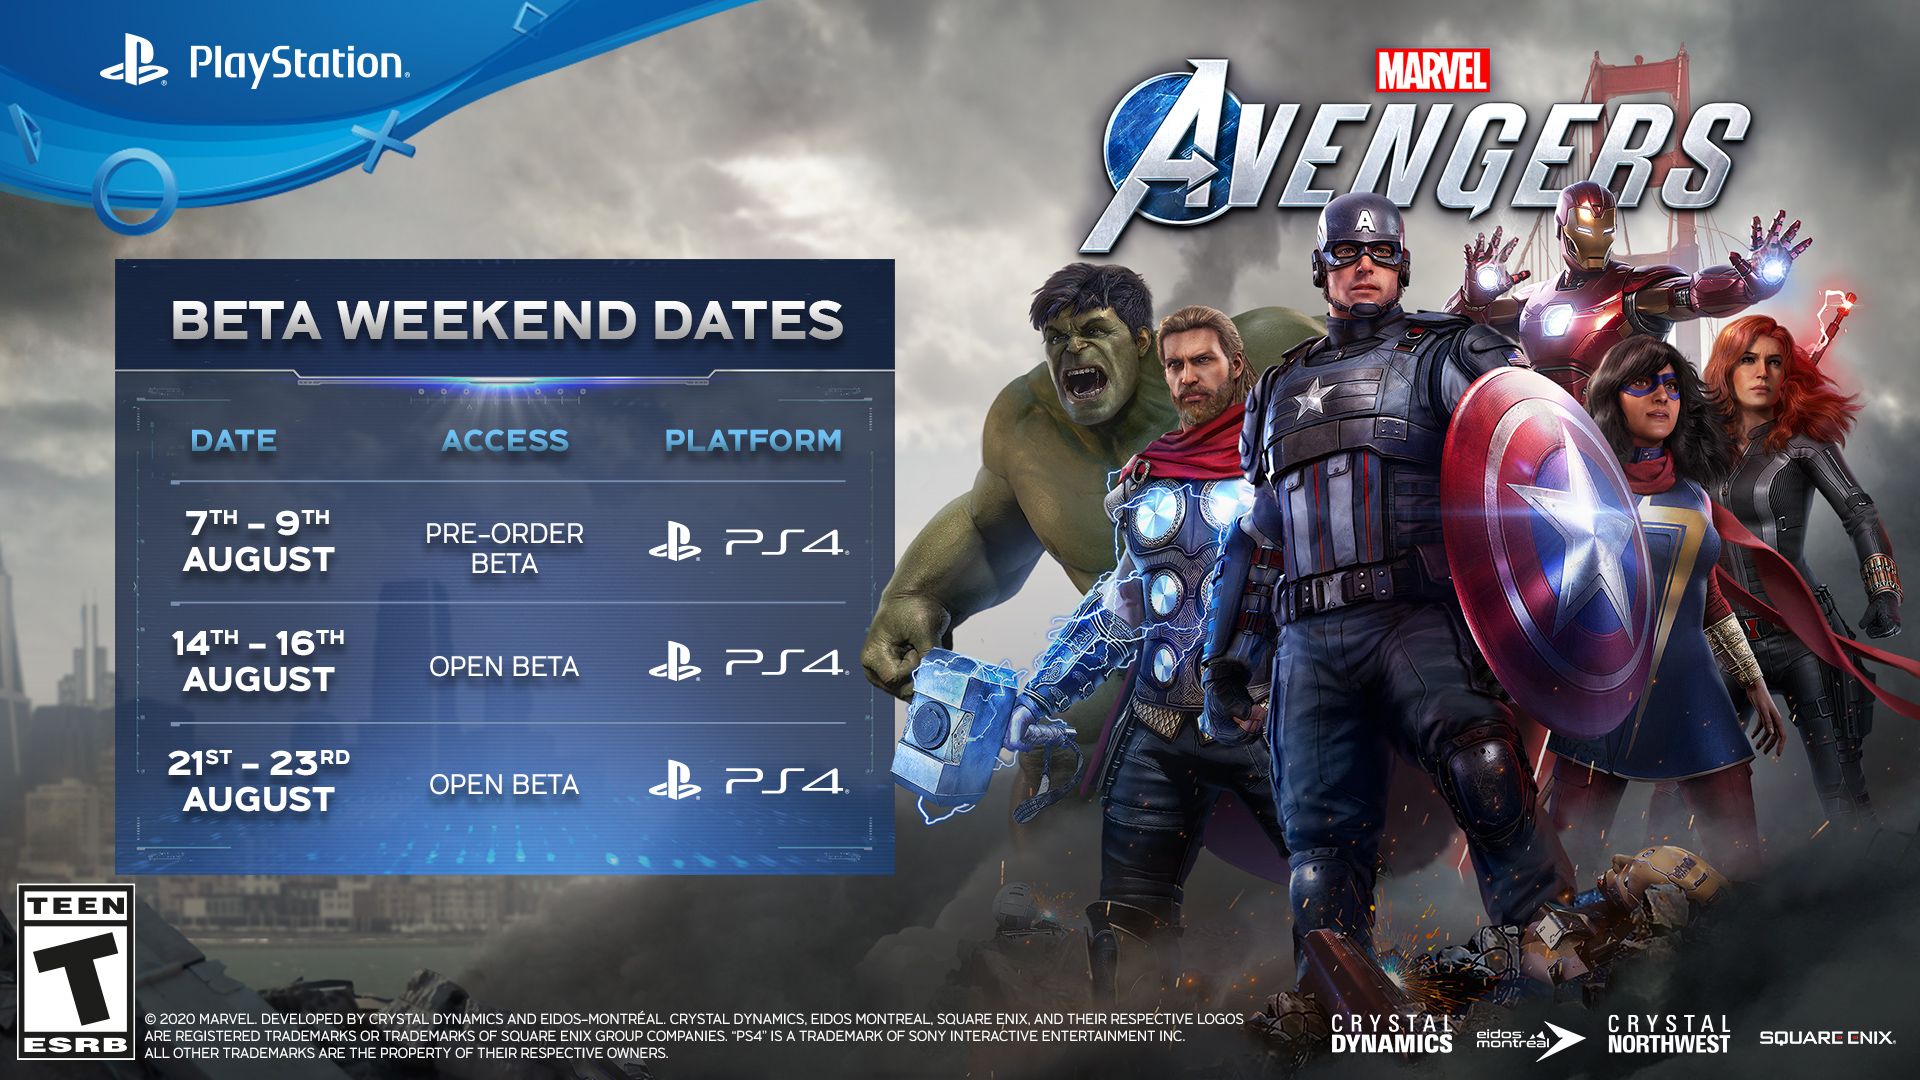 on Twitter: "Beginning initialization. The Marvel's Avengers available to pre-load for players who pre-ordered on PS4! ▶️ Pre-order to #Reassemble this weekend: https://t.co/1r4kNUaojH https://t.co/j9ZJm6108j" / Twitter